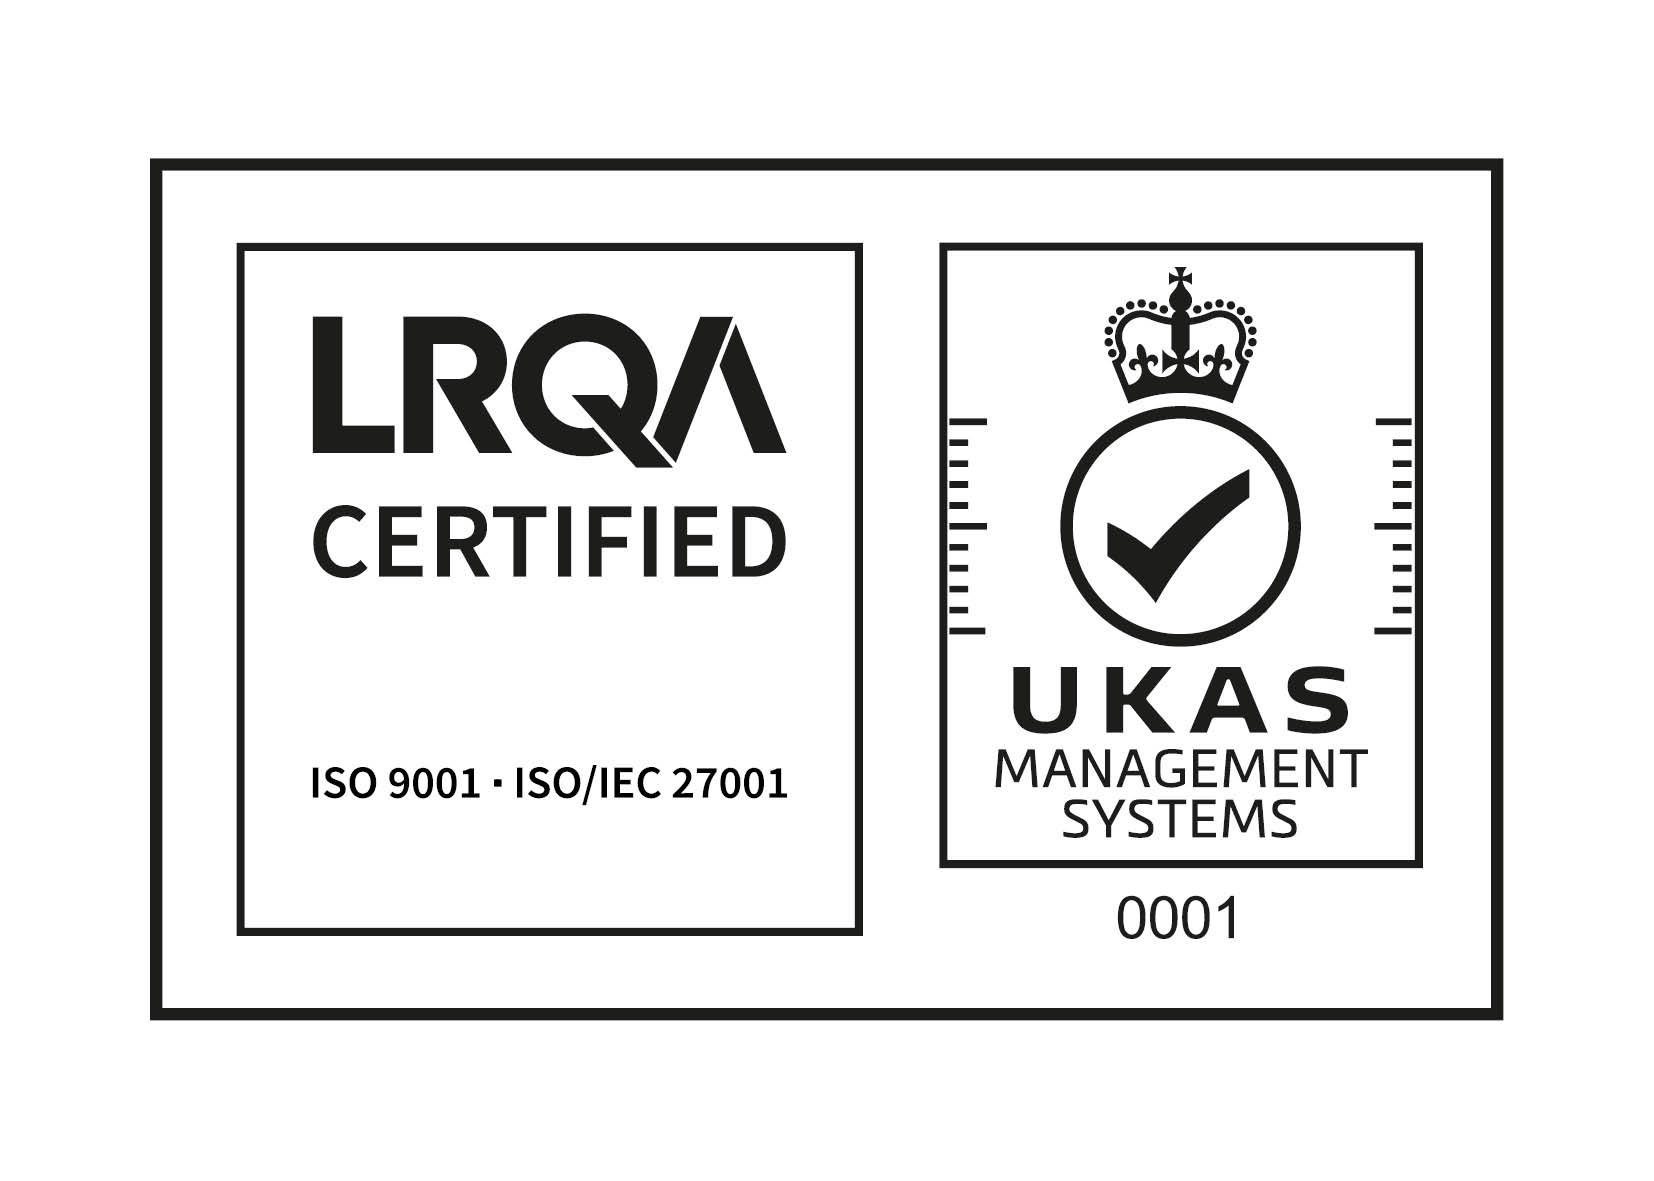 The first provider of our kind to achieve ISO/IEC 27001